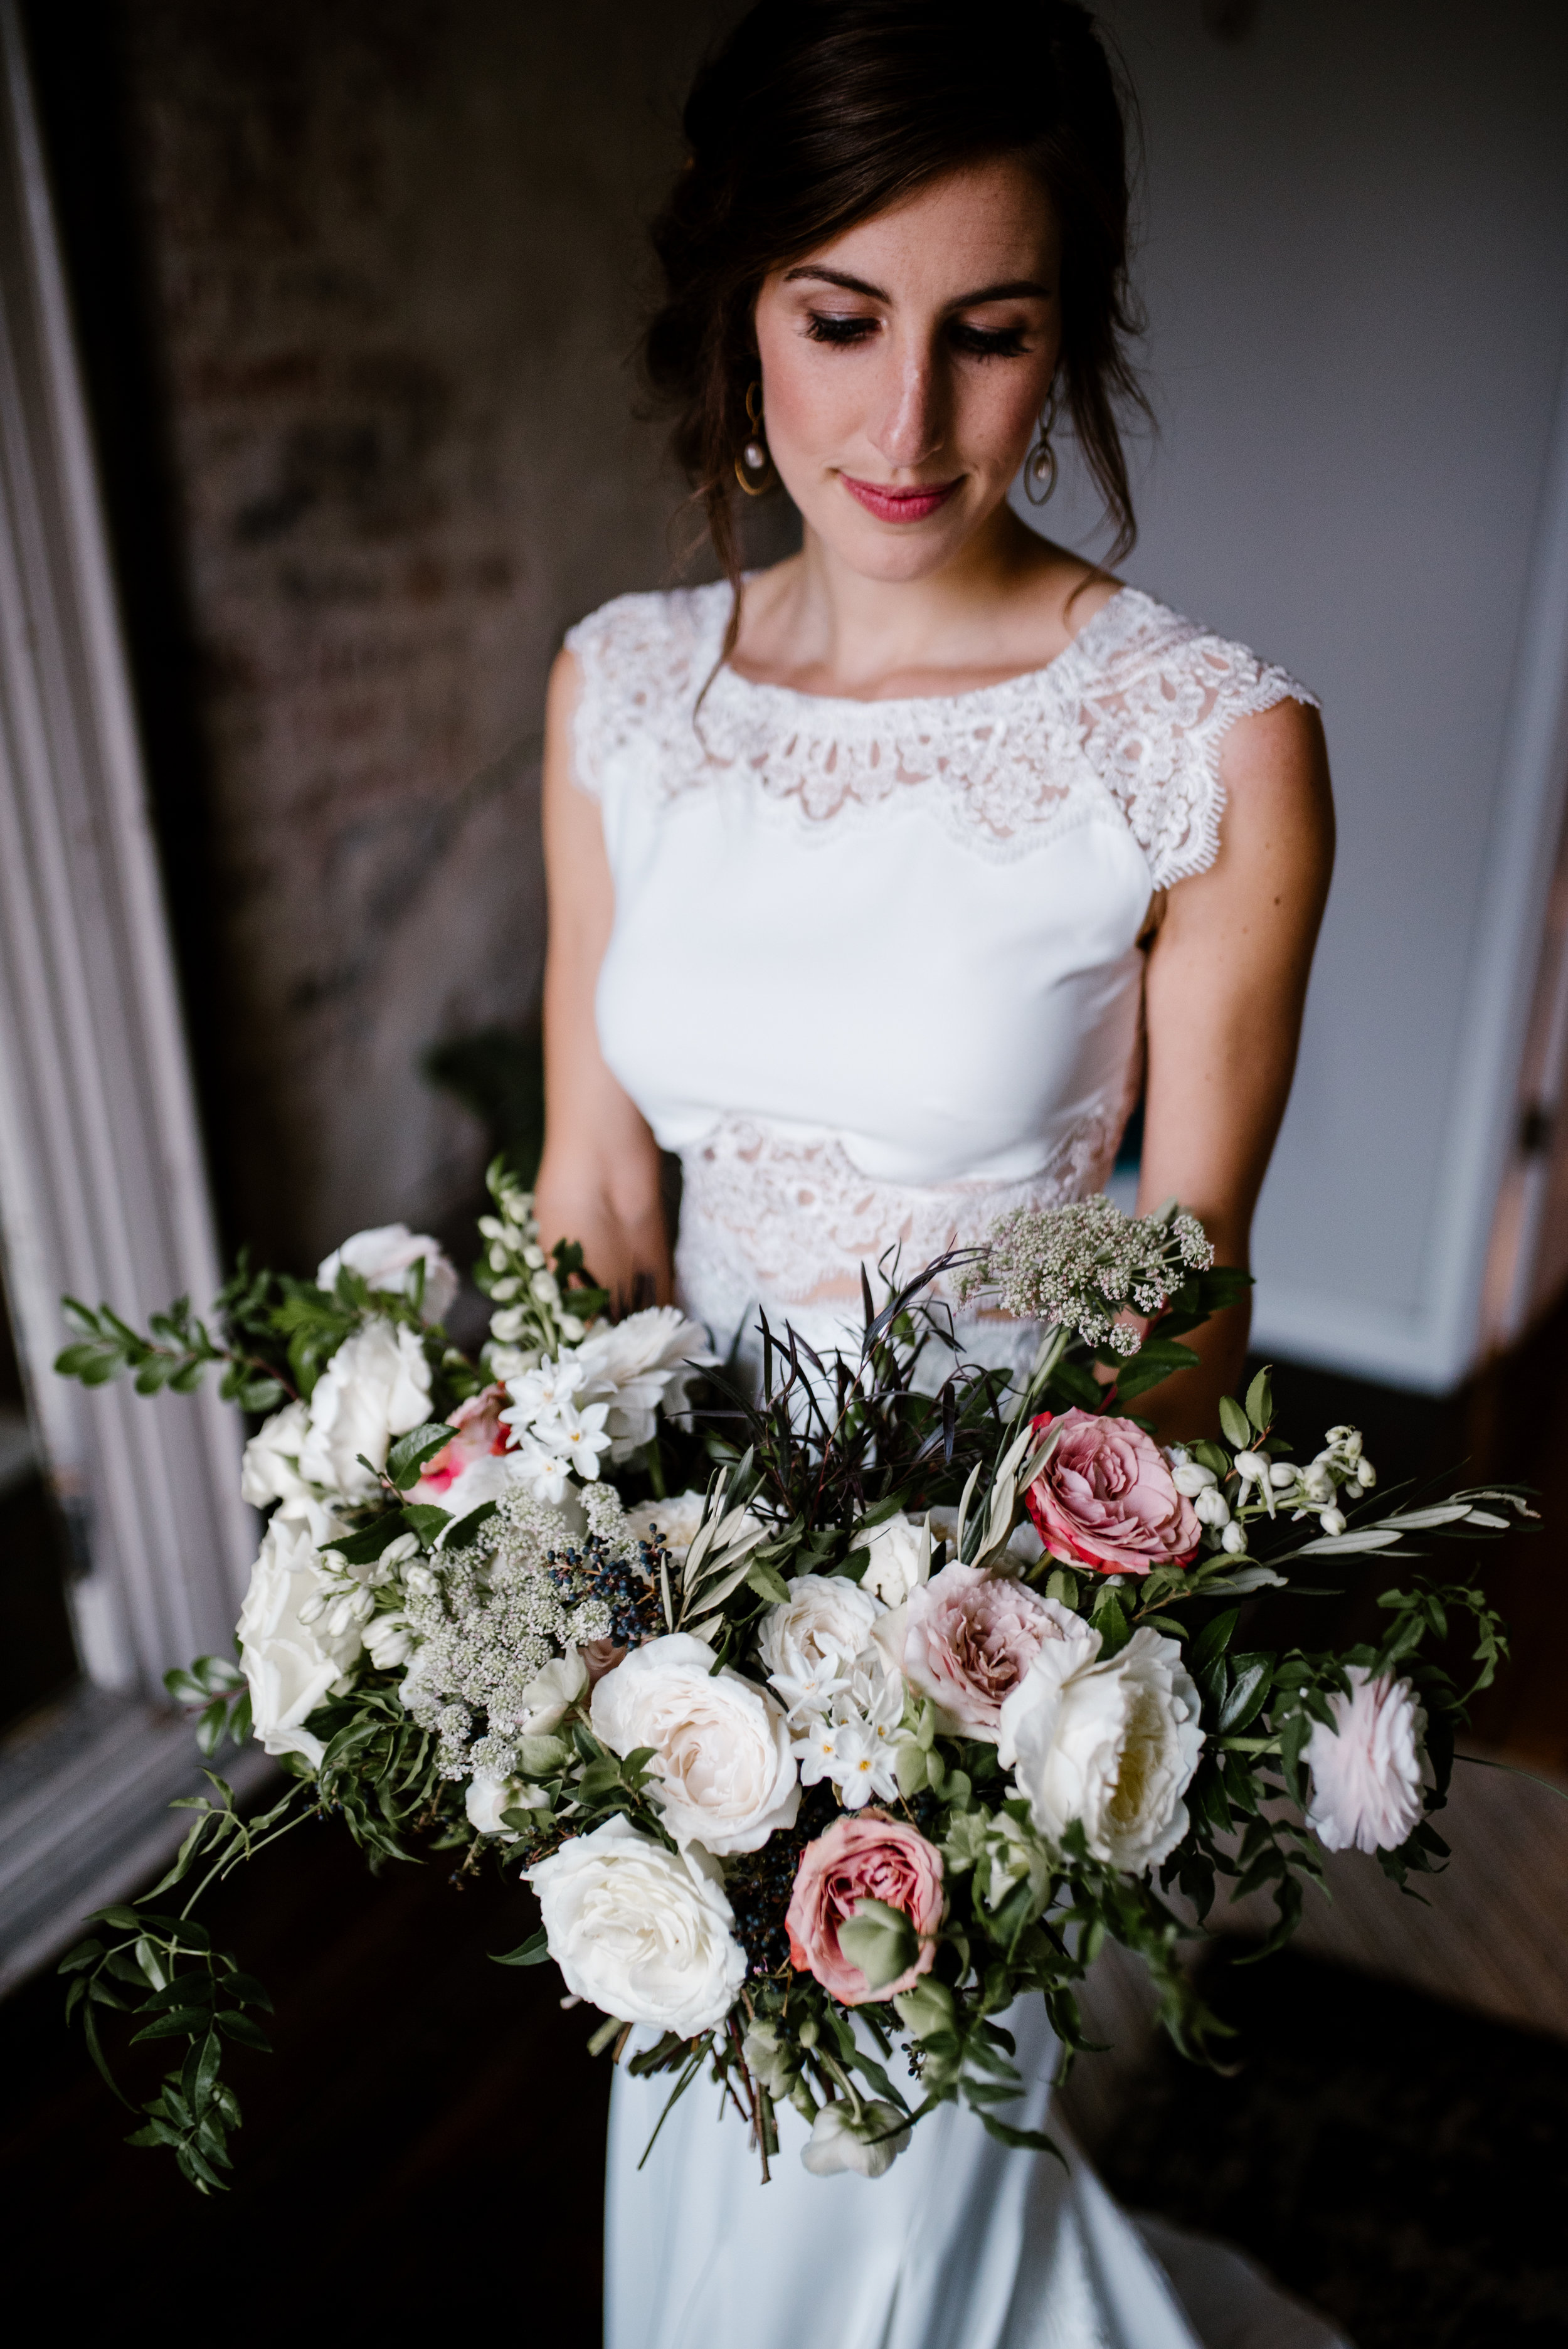 Natural, untamed wedding flowers with garden roses, ranunculus, and wildflowers // Southeastern Wedding Floral Designer